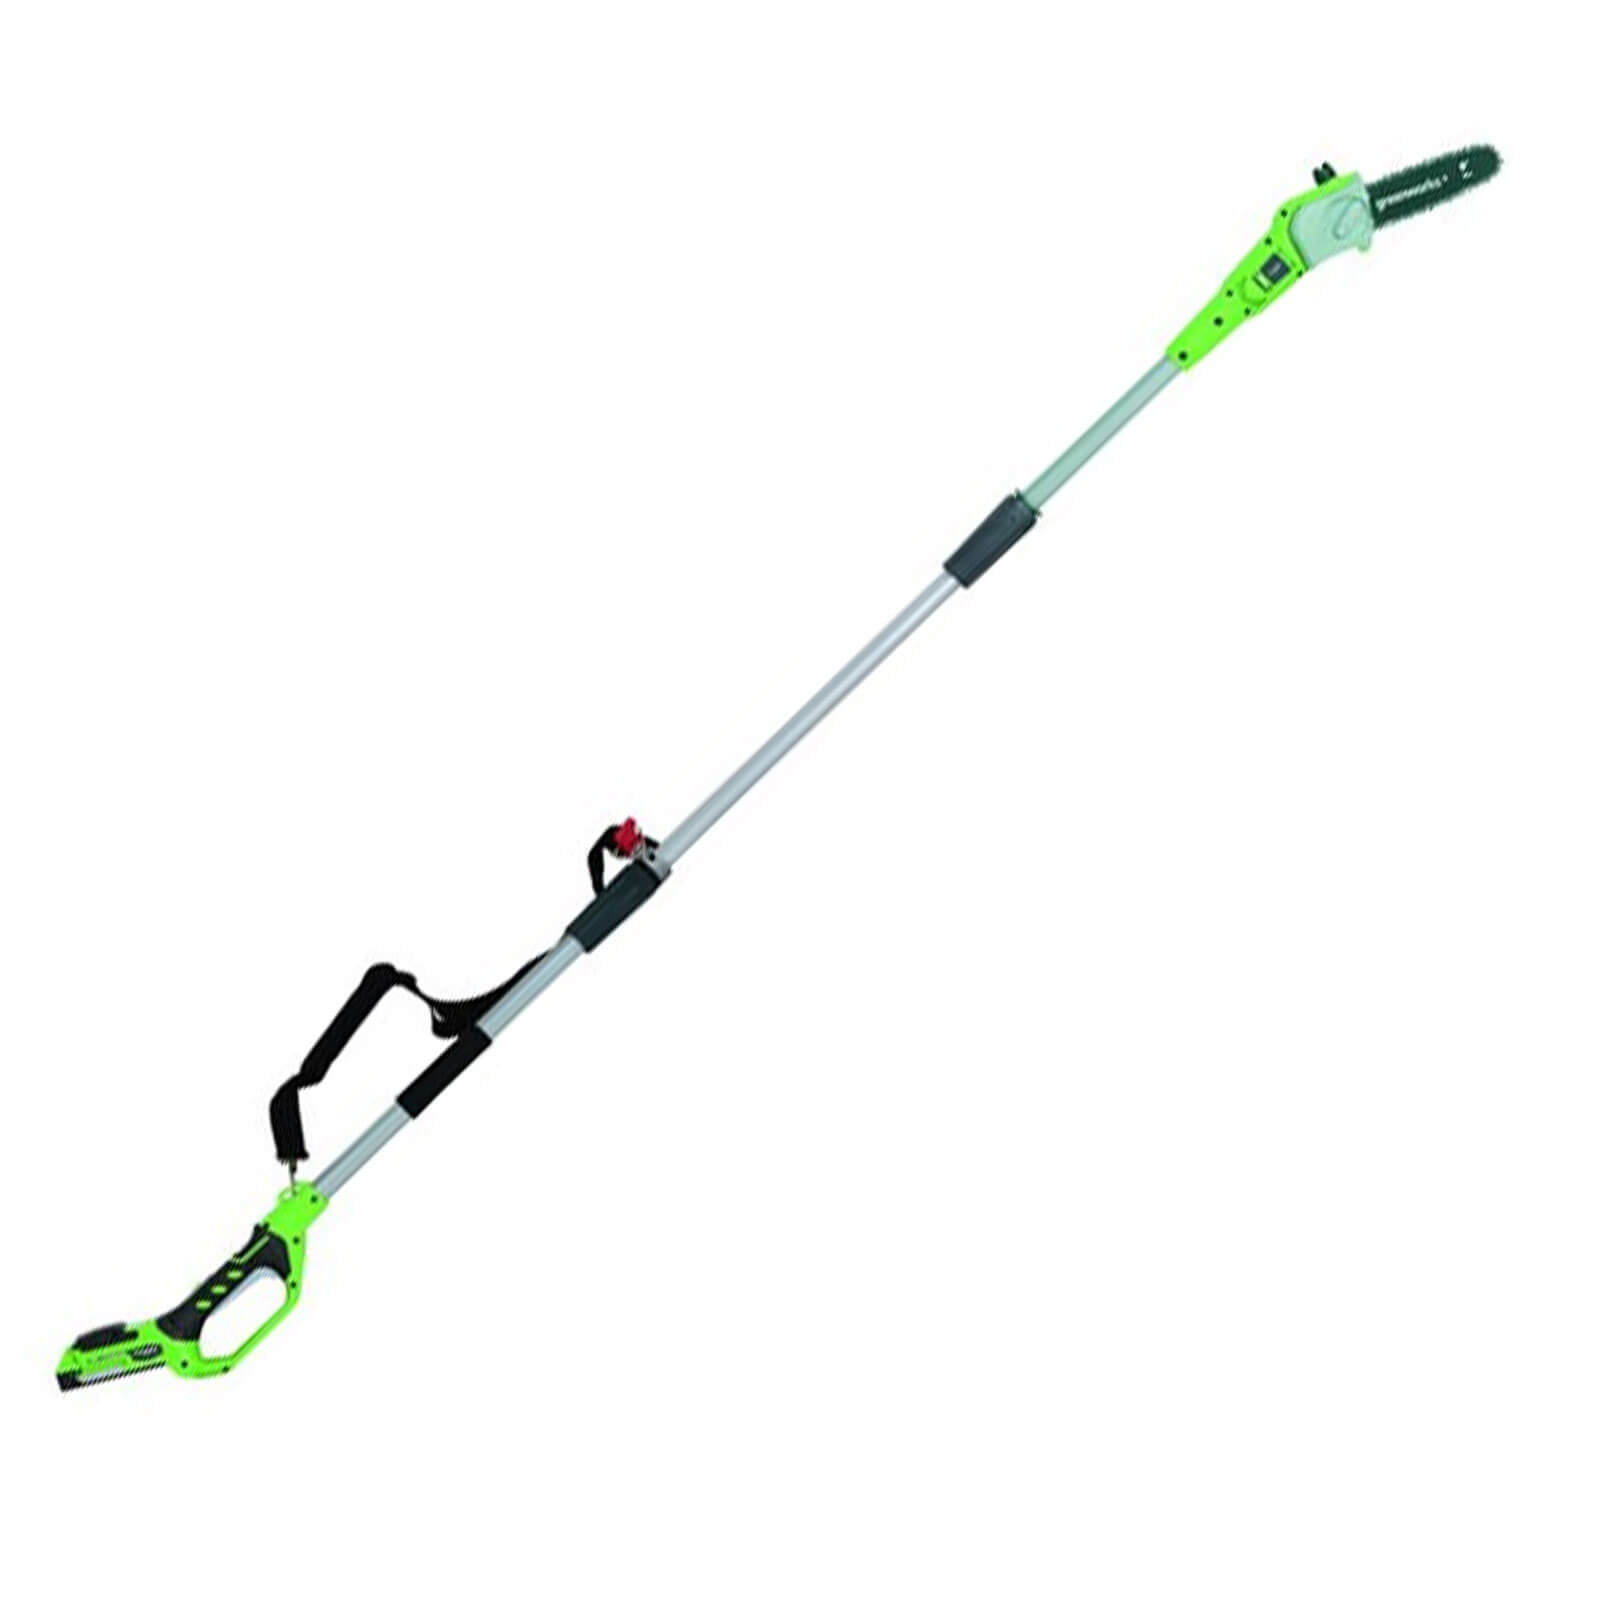 Greenworks G24PS 24v Cordless Telescopic Pole Tree Pruner 1 x 2ah Li-ion Charger FREE Chainsaw Oil Worth £9